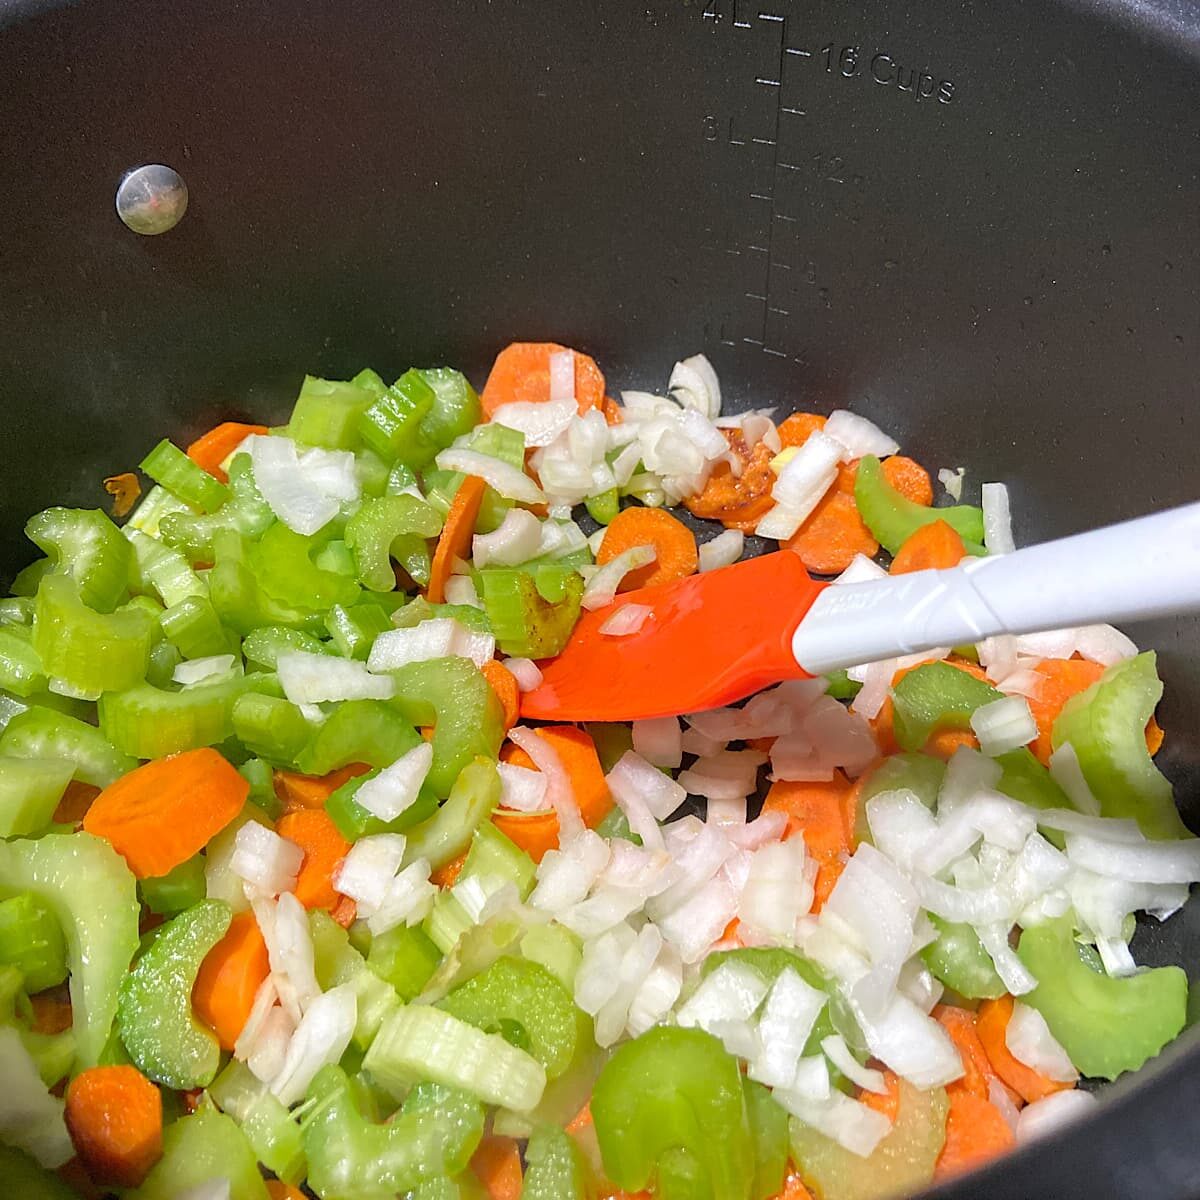 saute carrots, celery, onion, and garlic in olive oil in large pan